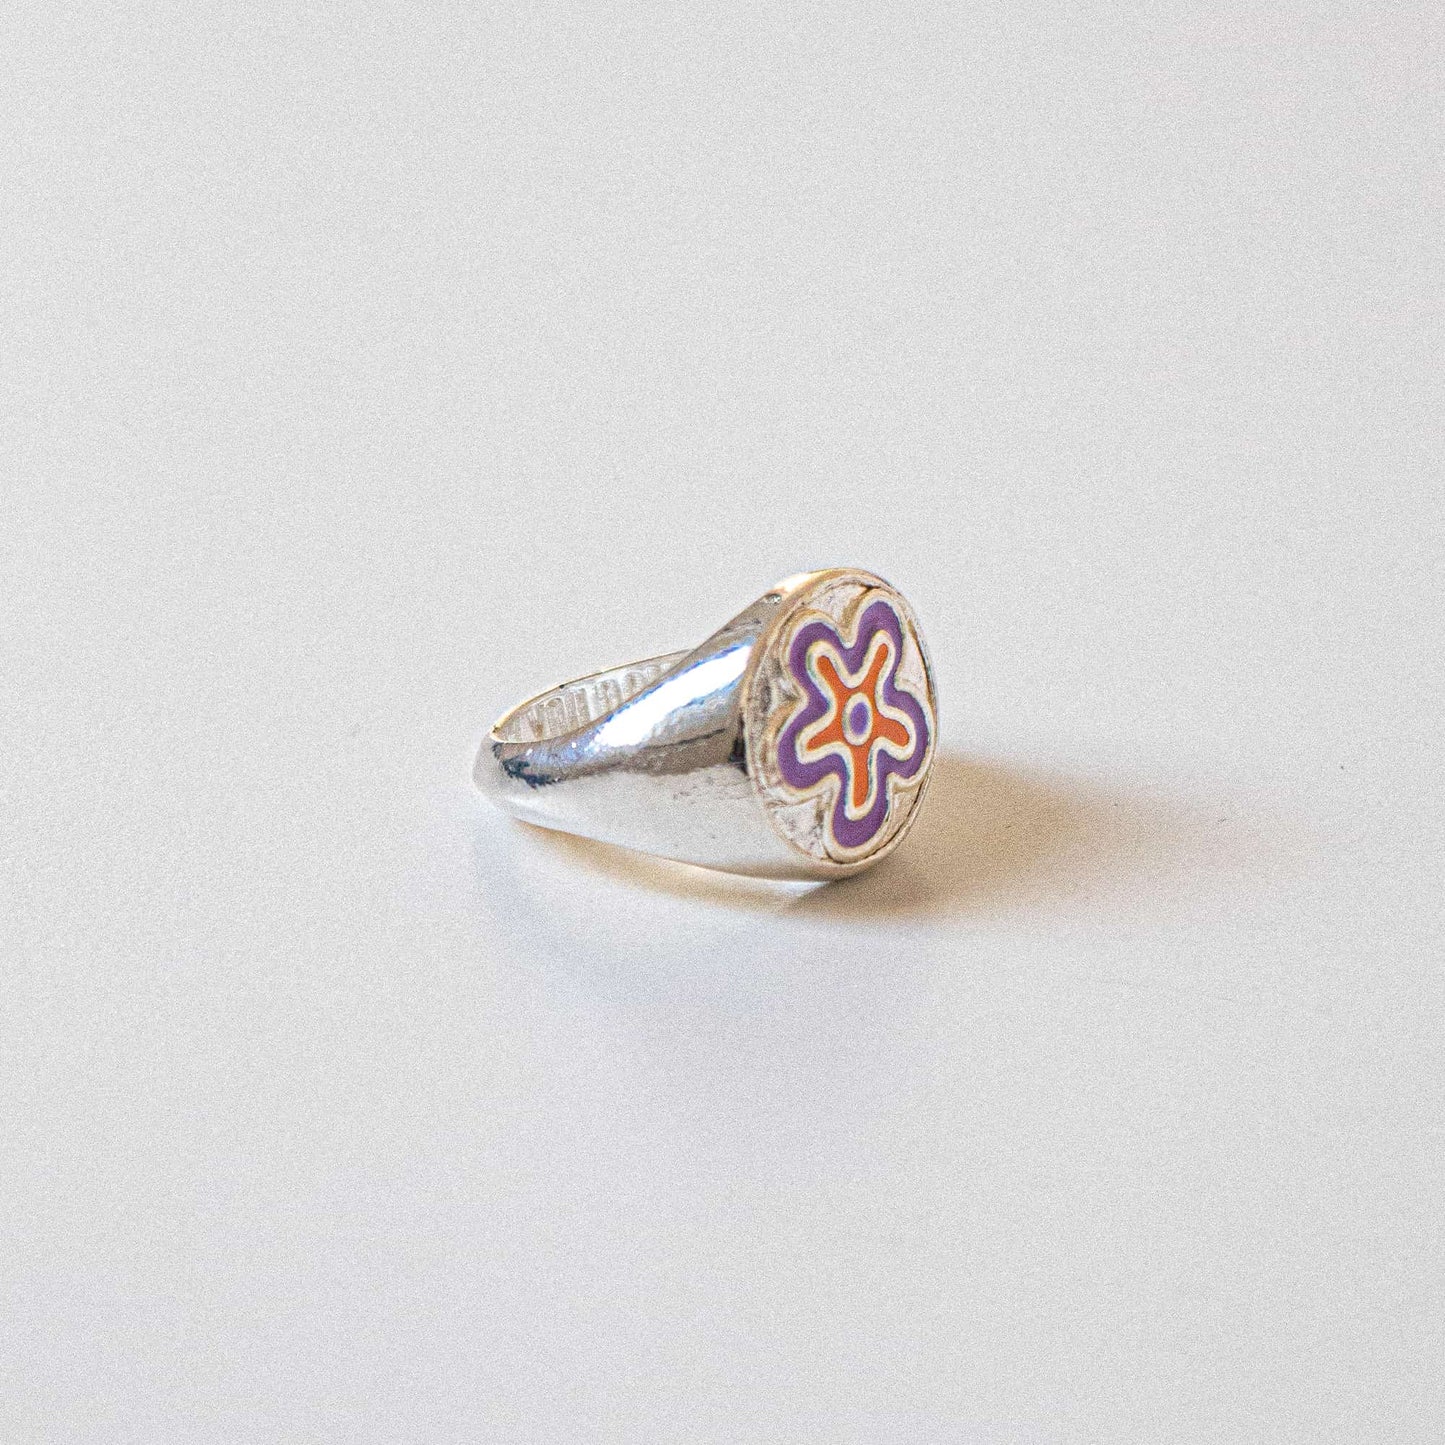 Atelier Domingo's Soul ring is our tribute to the hip-hop group De La Soul. This ring has been designed in France and is made for both men and women. This jewelry is made of a high-quality 925 Sterling silver plating.